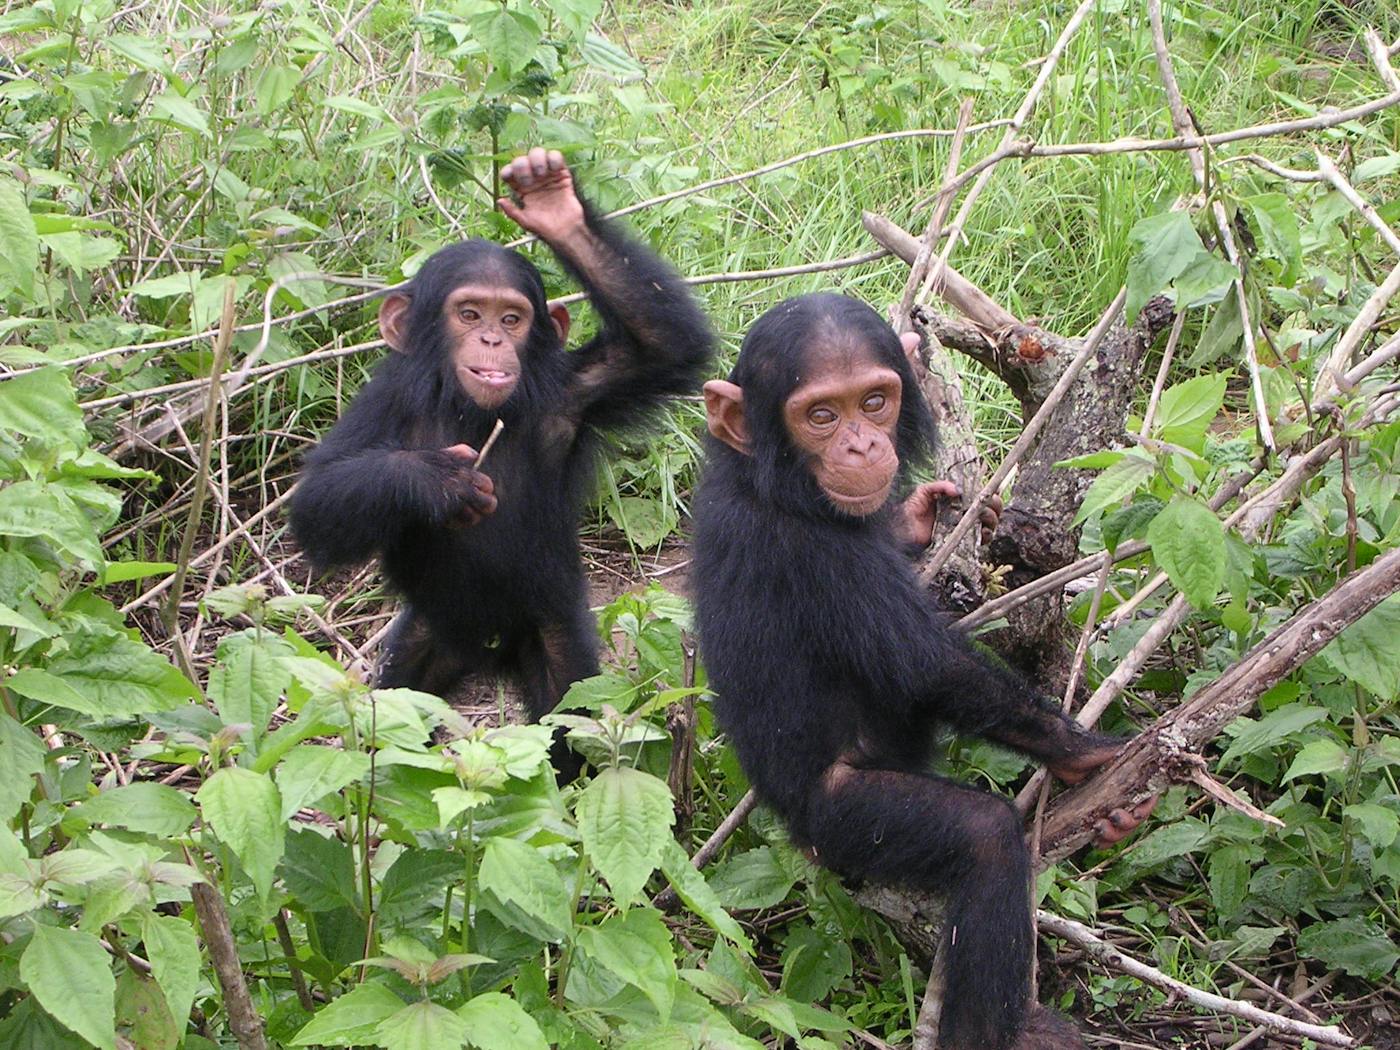 Saving the Endangered Western Chimpanzee Population of Bossou in West Africa